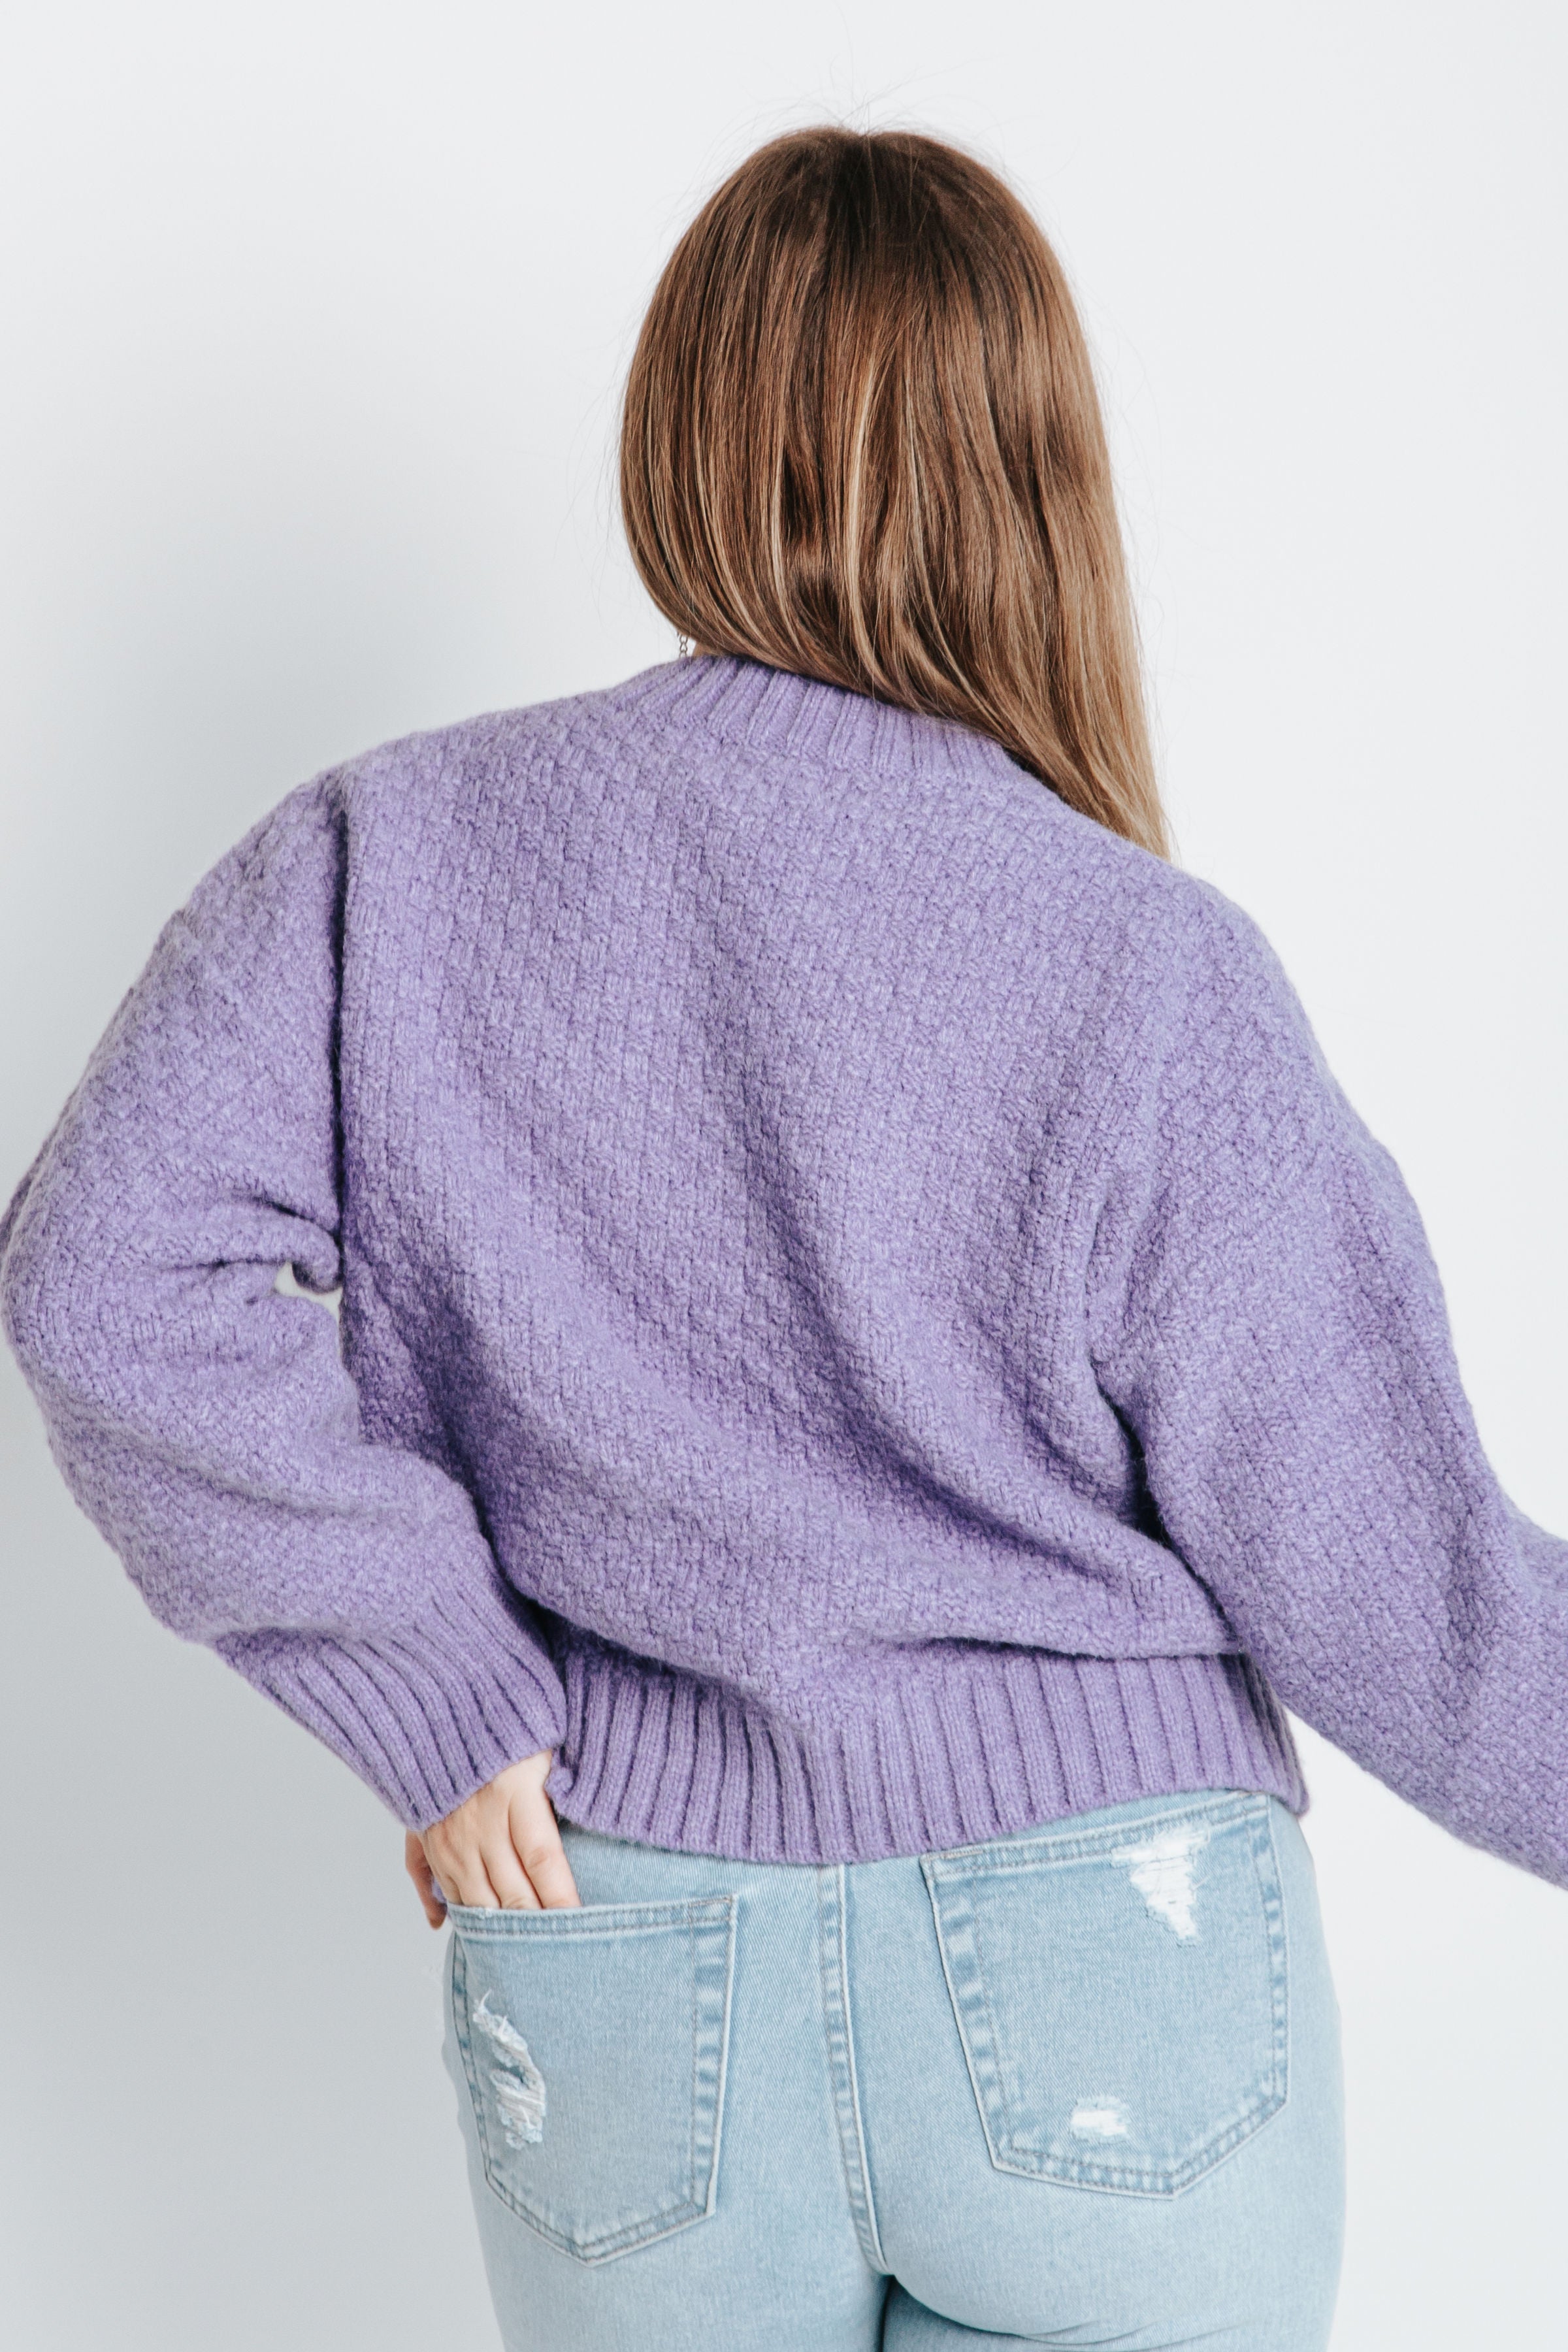 The Baird Detailed Sleeve Sweater in Lavender